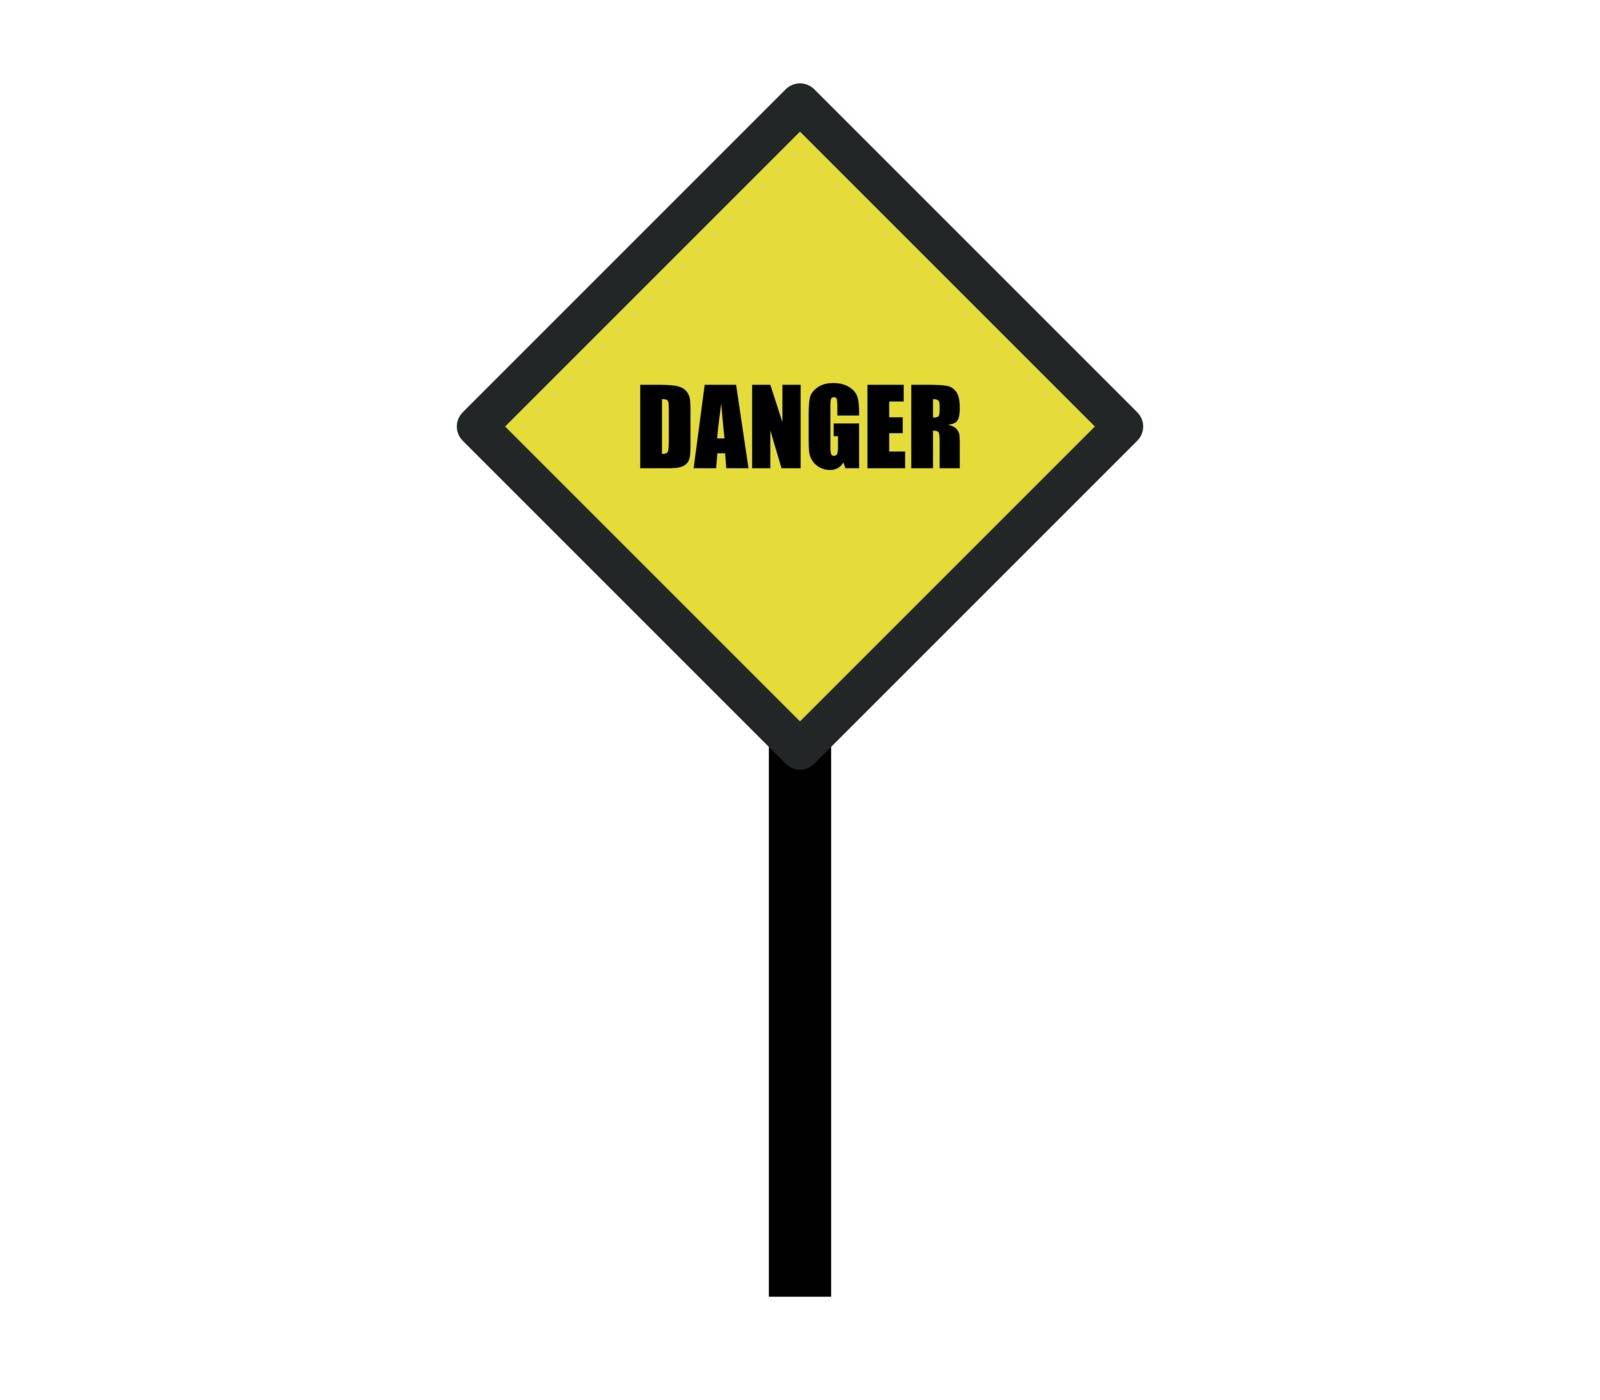 danger sign icon by Mark1987